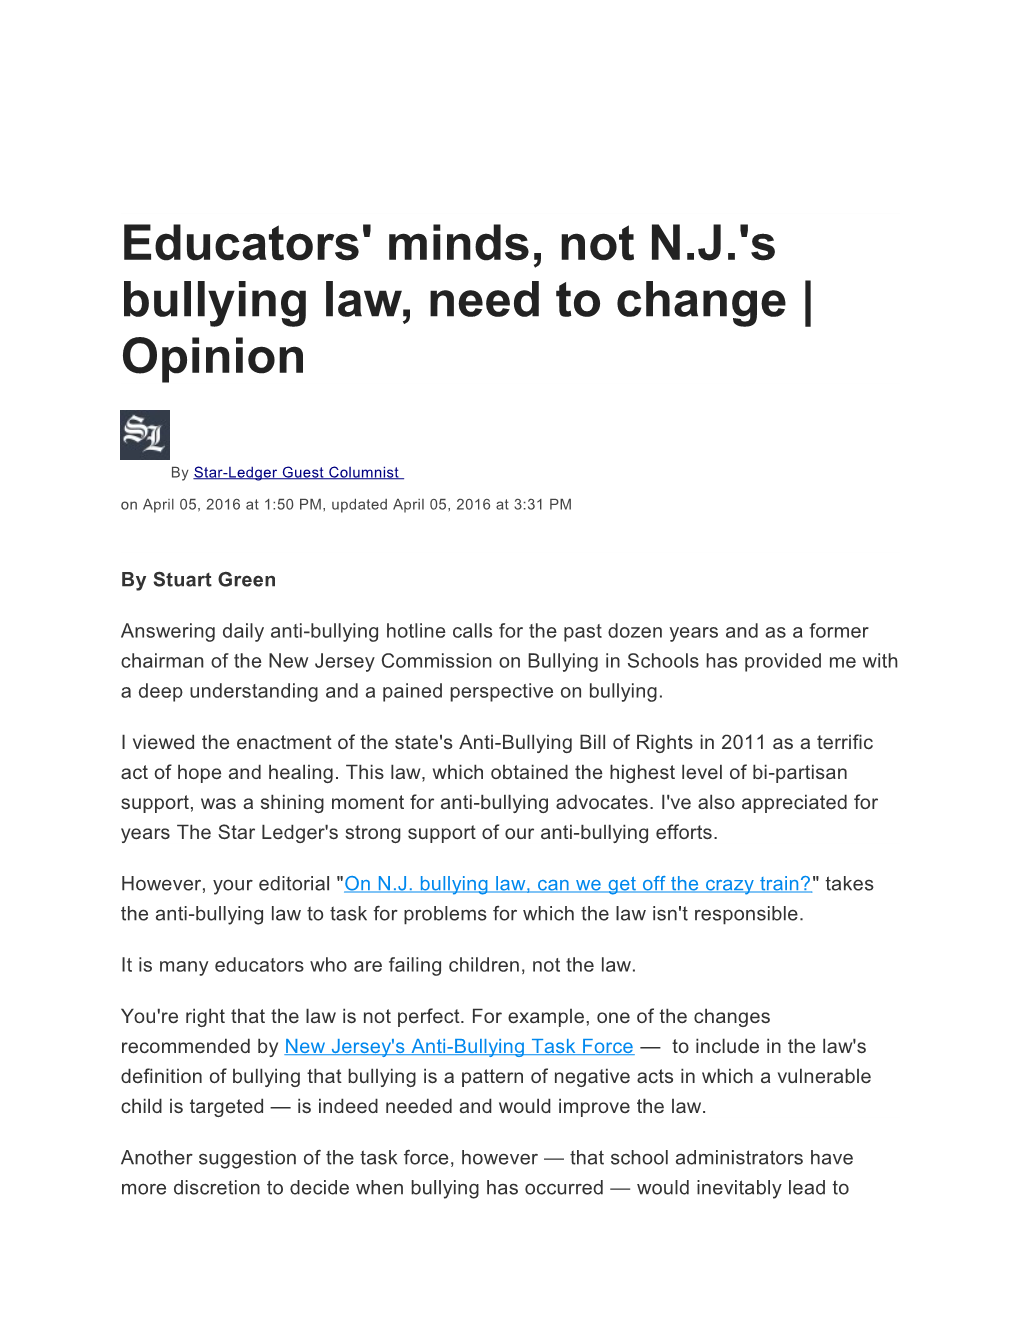 Educators' Minds, Not N.J.'S Bullying Law, Need to Change Opinion